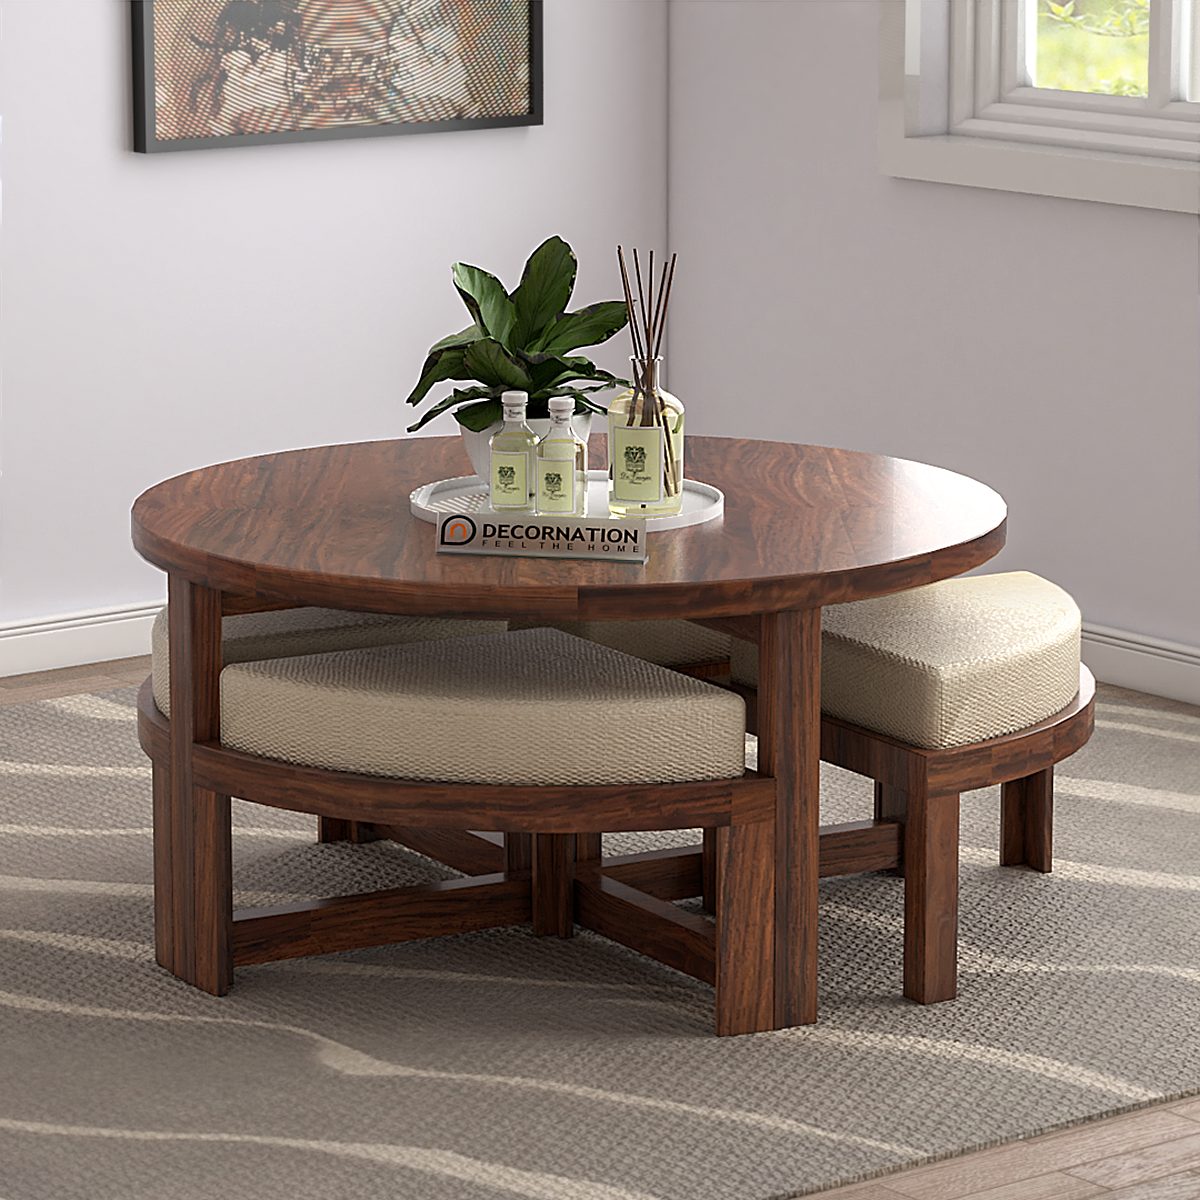 Exeter Solid Wooden Circular Coffee Table with 4 Stools - Natural